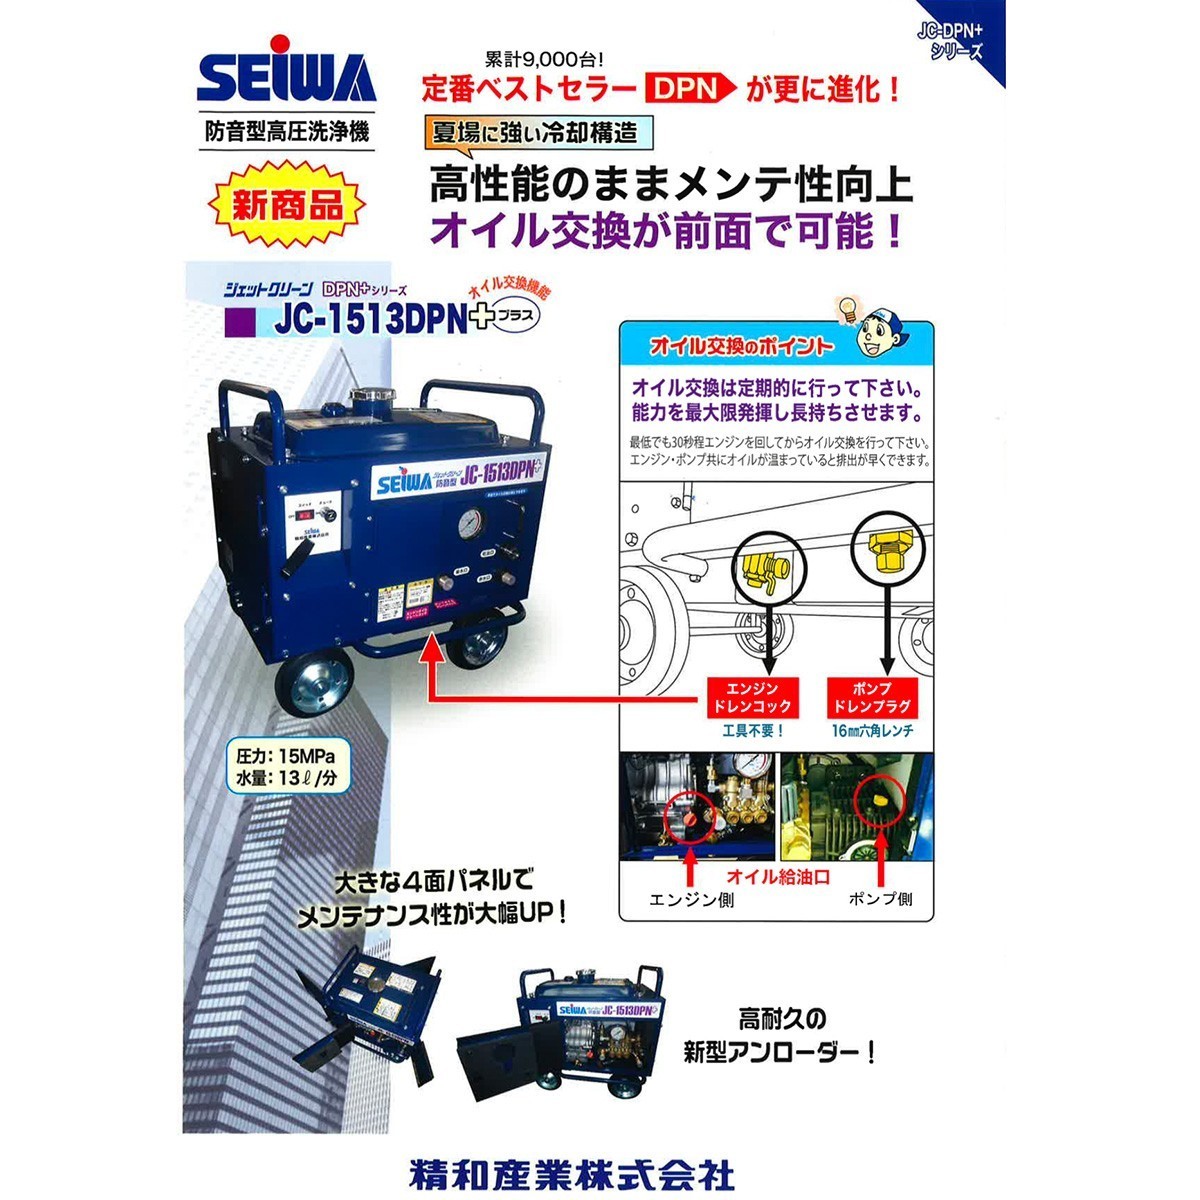 JC-1513DPN+. peace industry high pressure washer soundproofing type high endurance pump seiwa